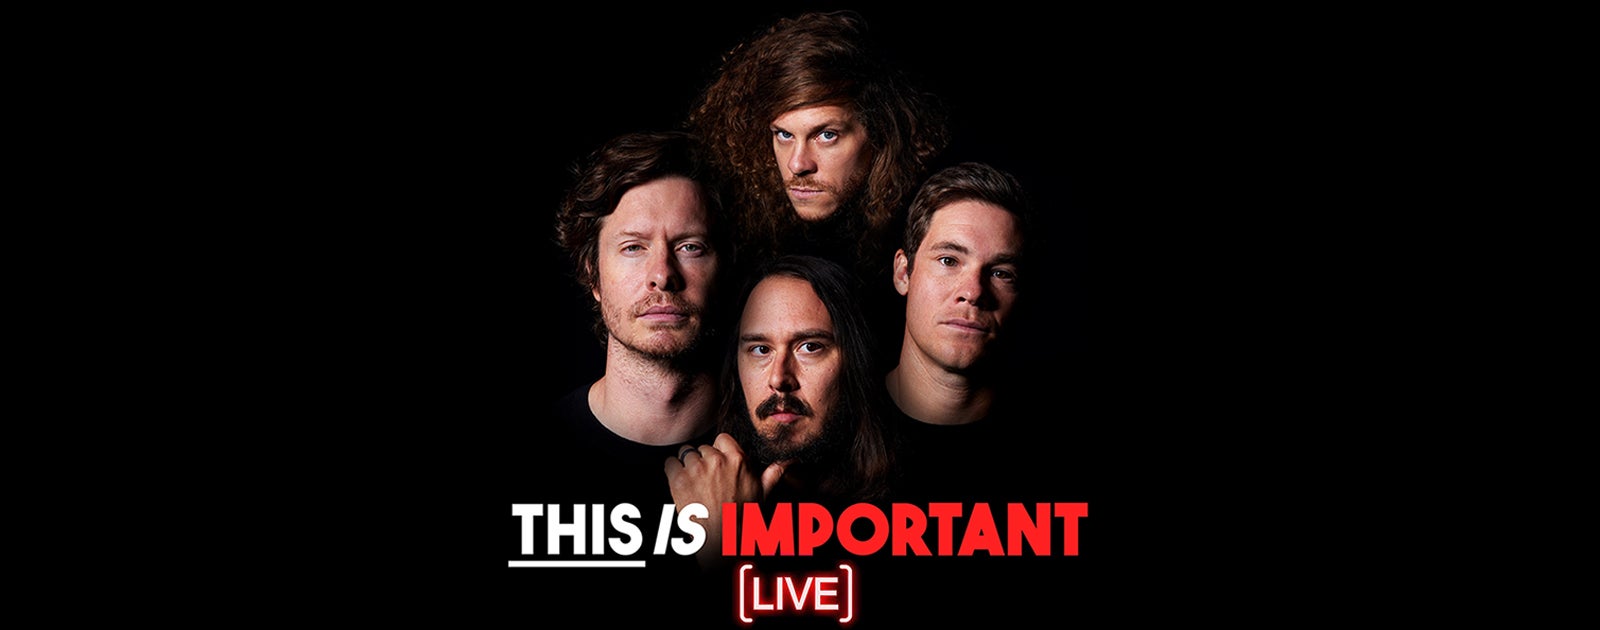 This Is Important Live!